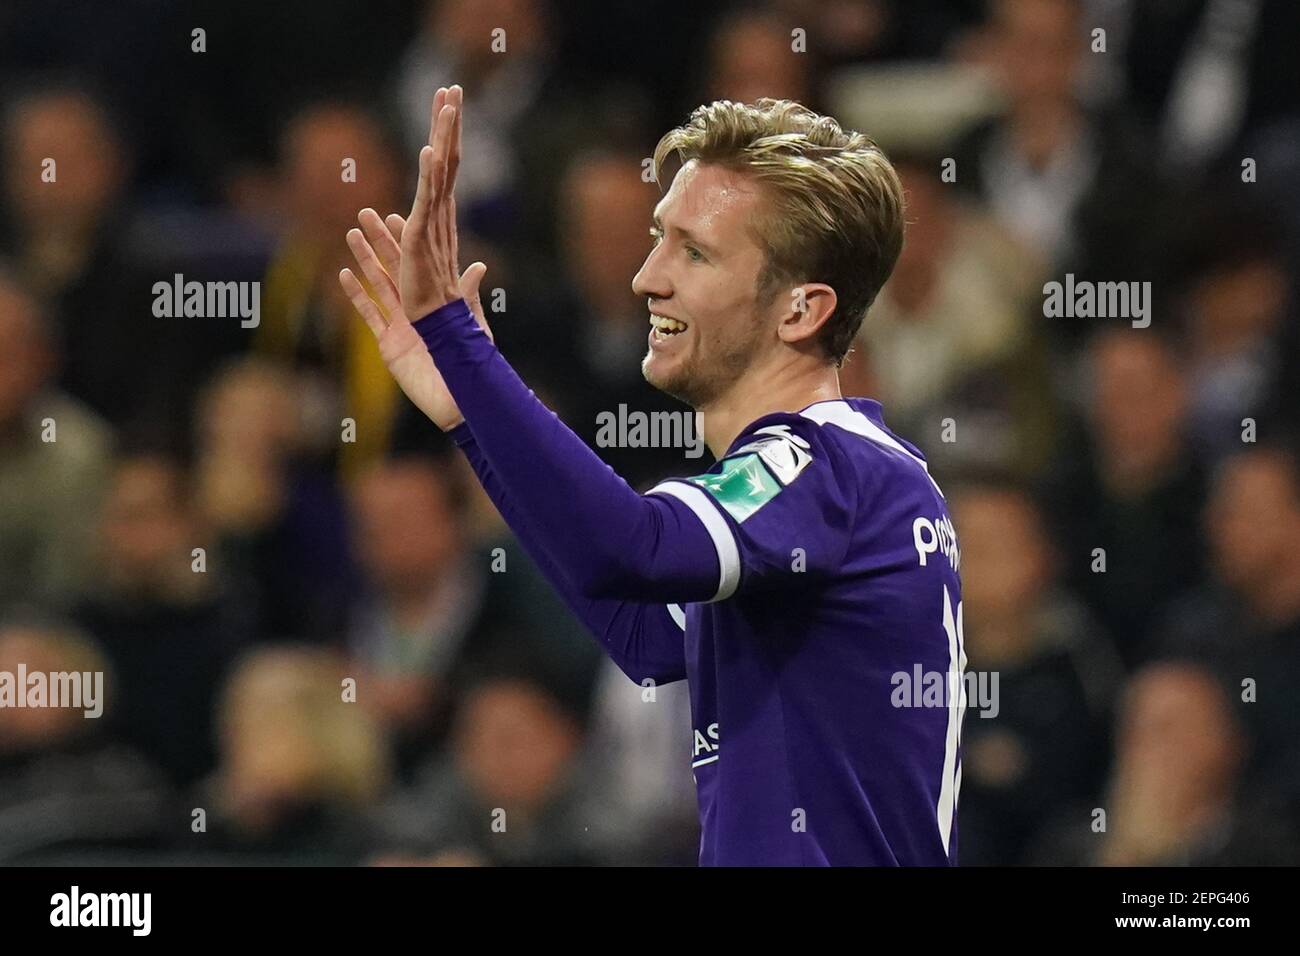 Anderlecht's Michel Vlap pictured during a soccer game between RSCA  Anderlecht and Club Brugge FC, Thursday 19 December 2019 in Anderlecht, in  the 1/4th final of the 'Croky Cup' Belgian cup. BELGA